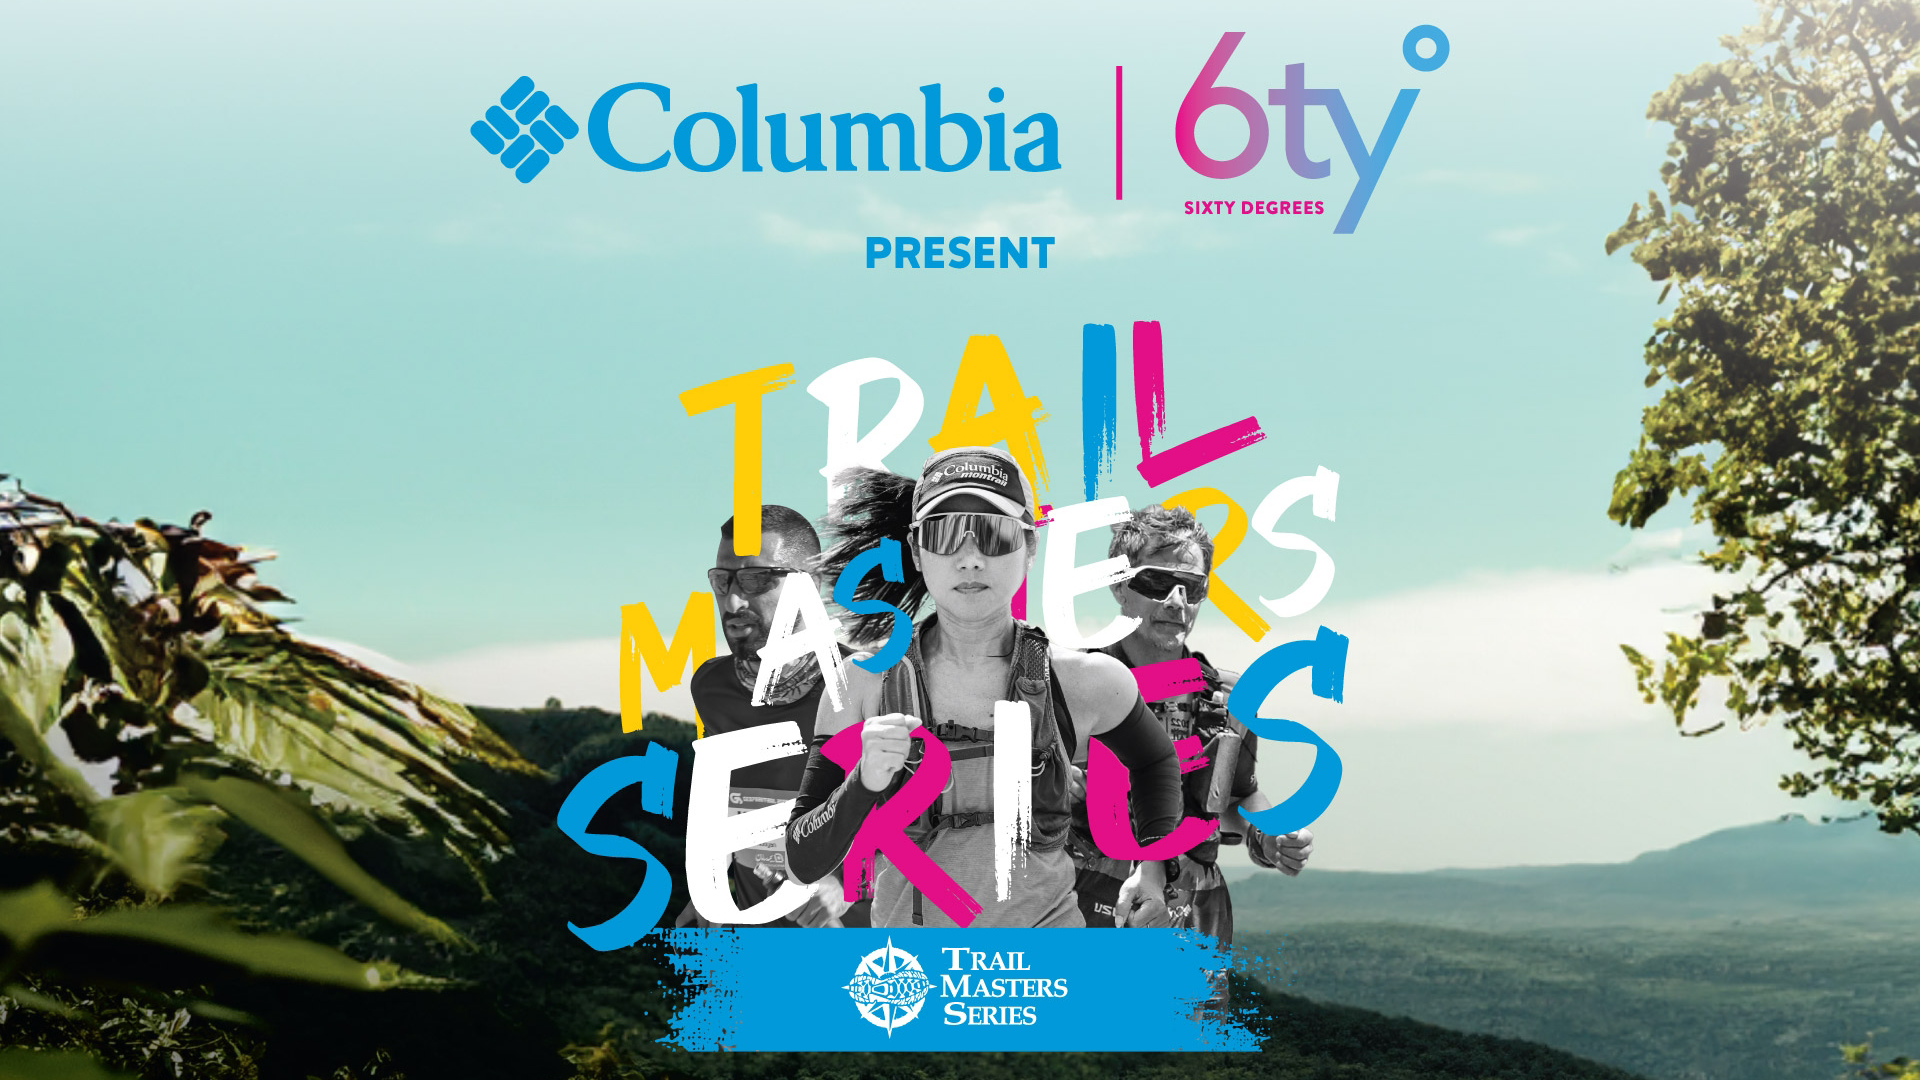 Columbia | 6ty° Sixty Degrees presents TMS 2024